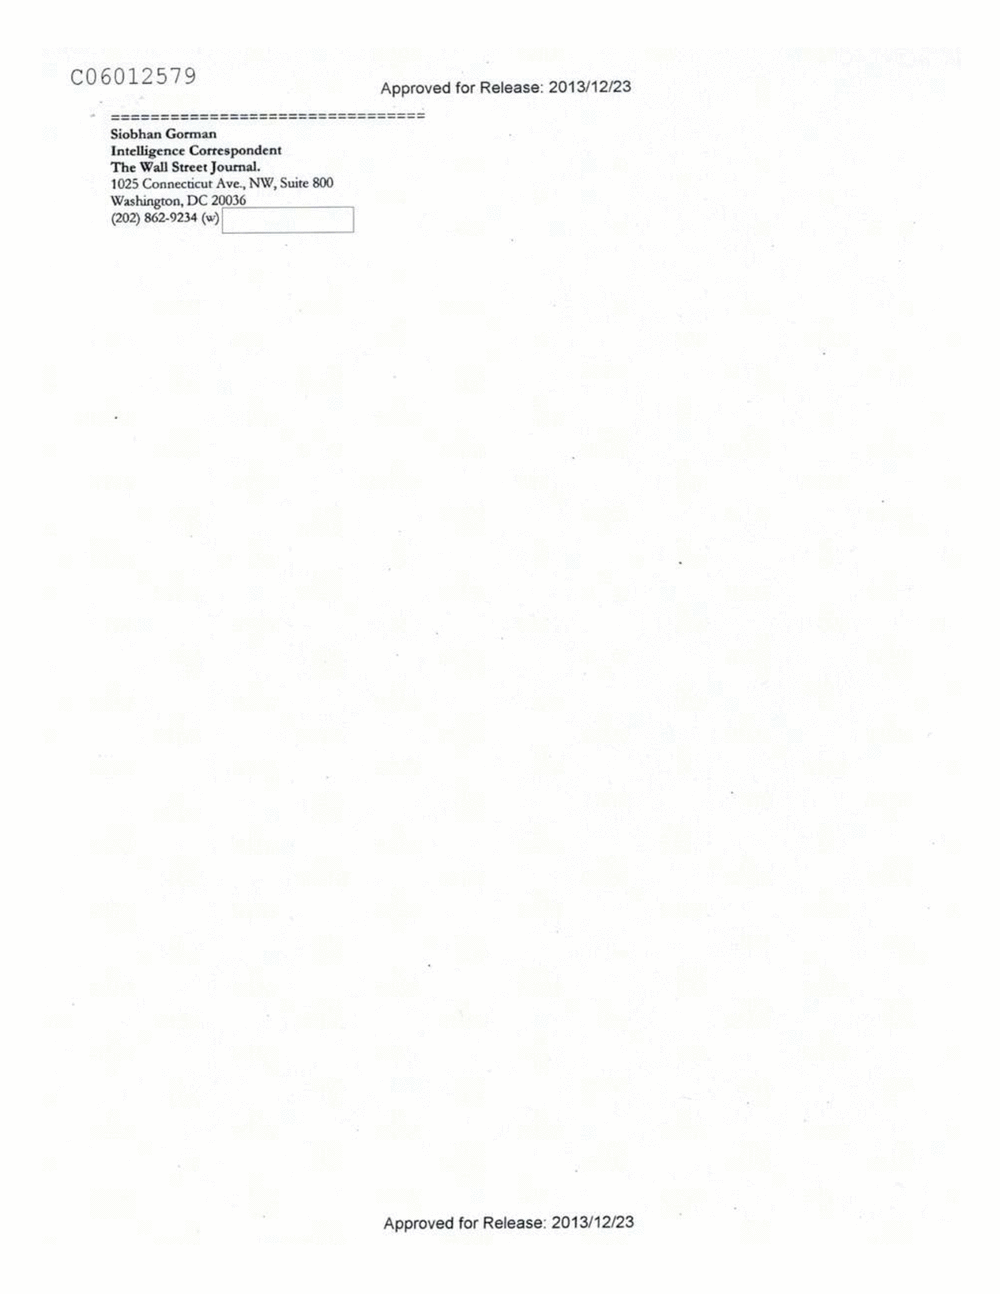 Page 117 from Email Correspondence Between Reporters and CIA Flacks